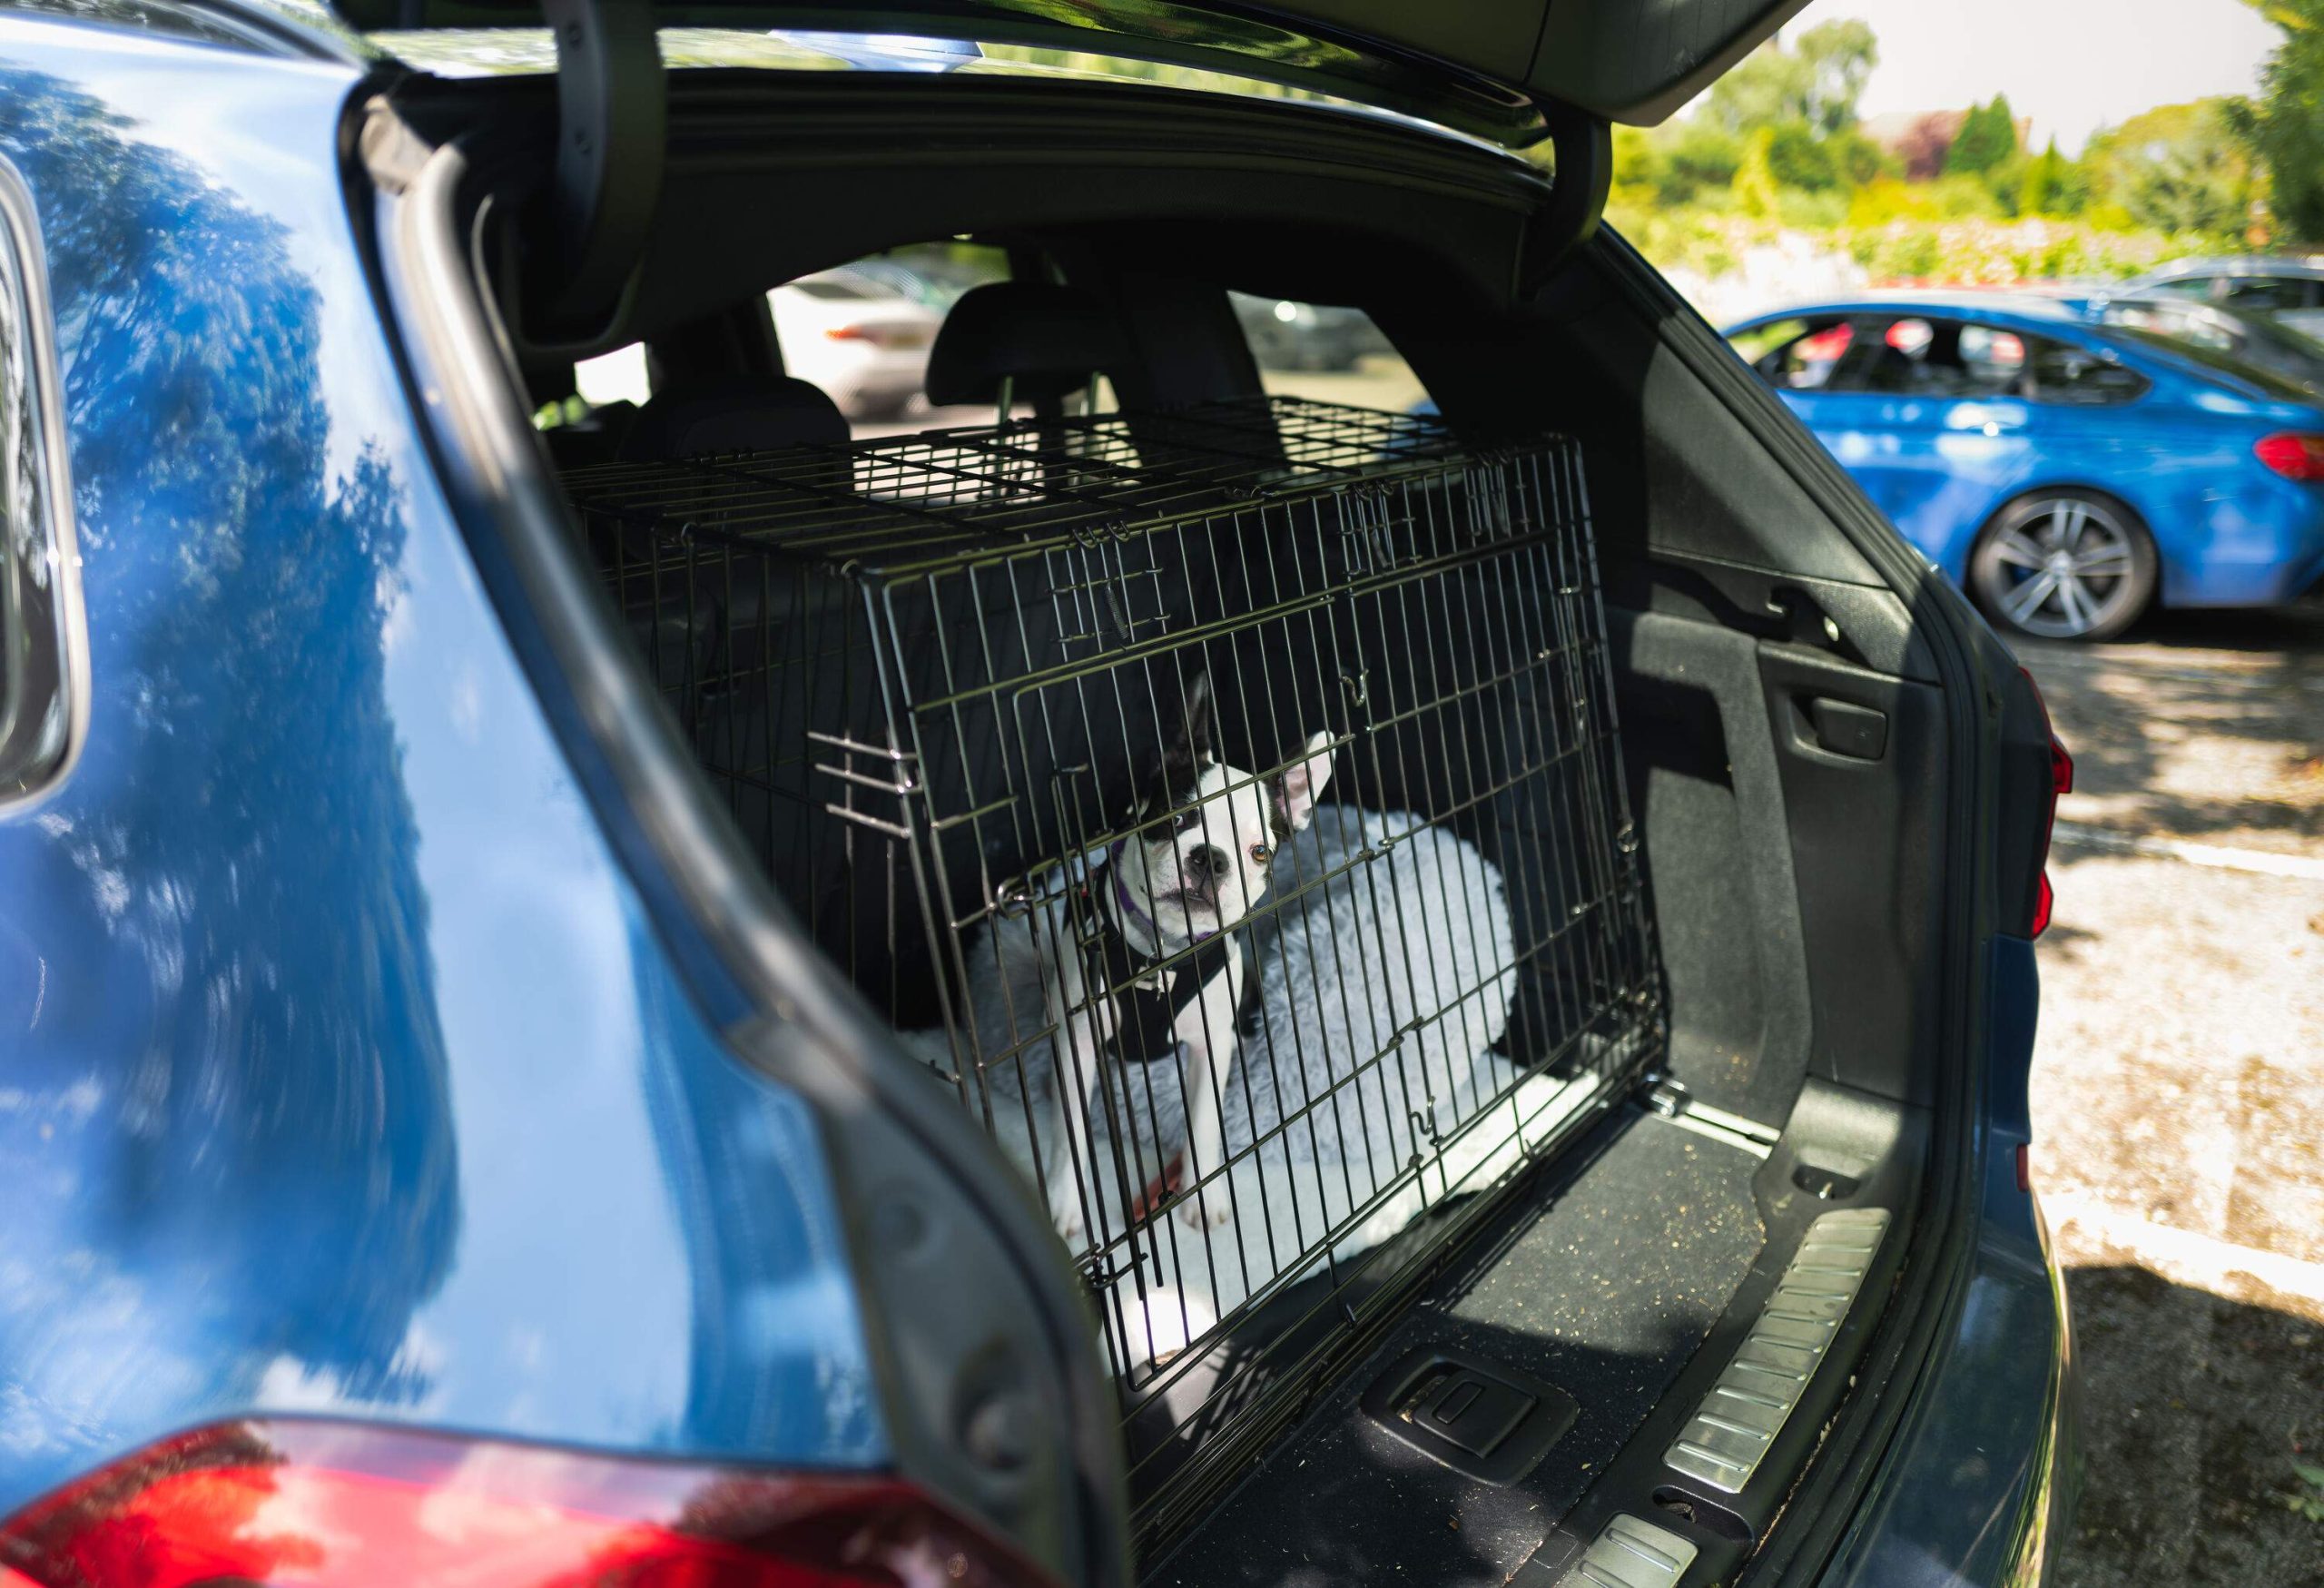 A caged dog on a car trunk.